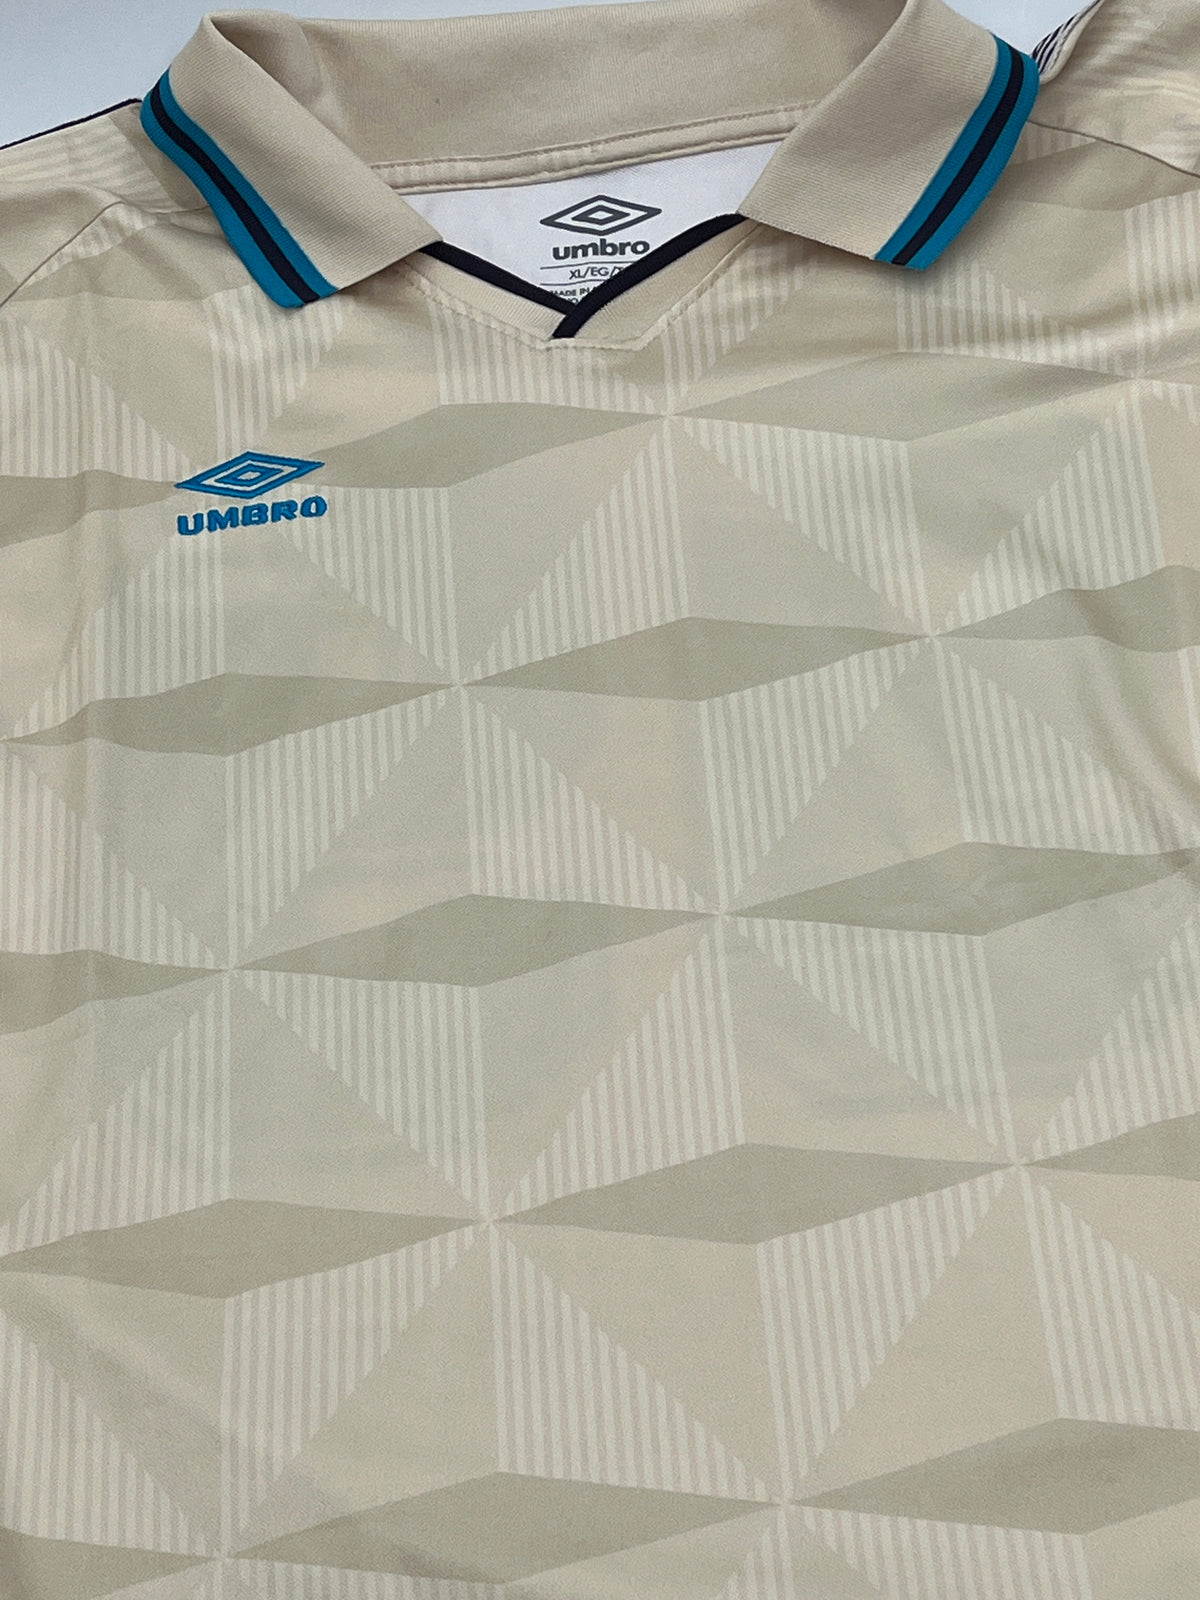 Tan and Teal Vintage Long Sleeve Umbro Jersey